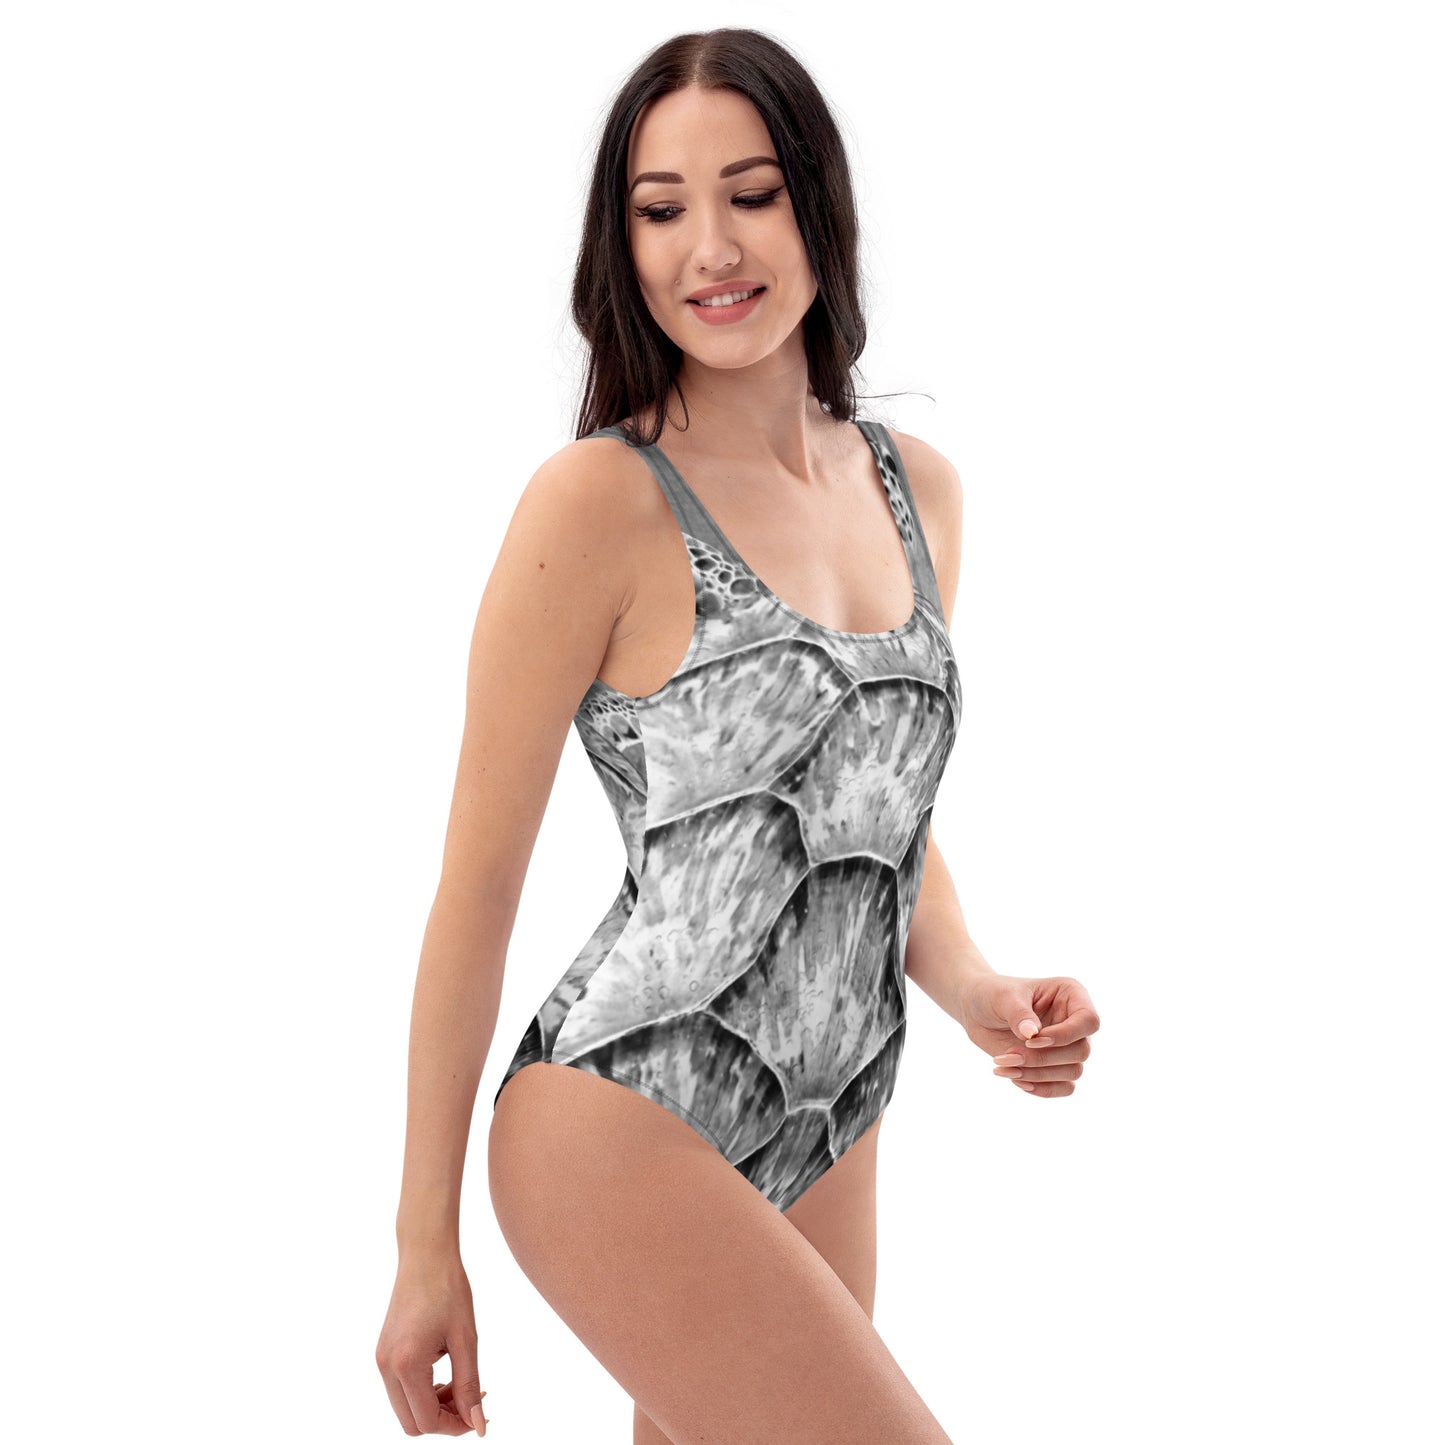 Rockley Black and White Swimsuit